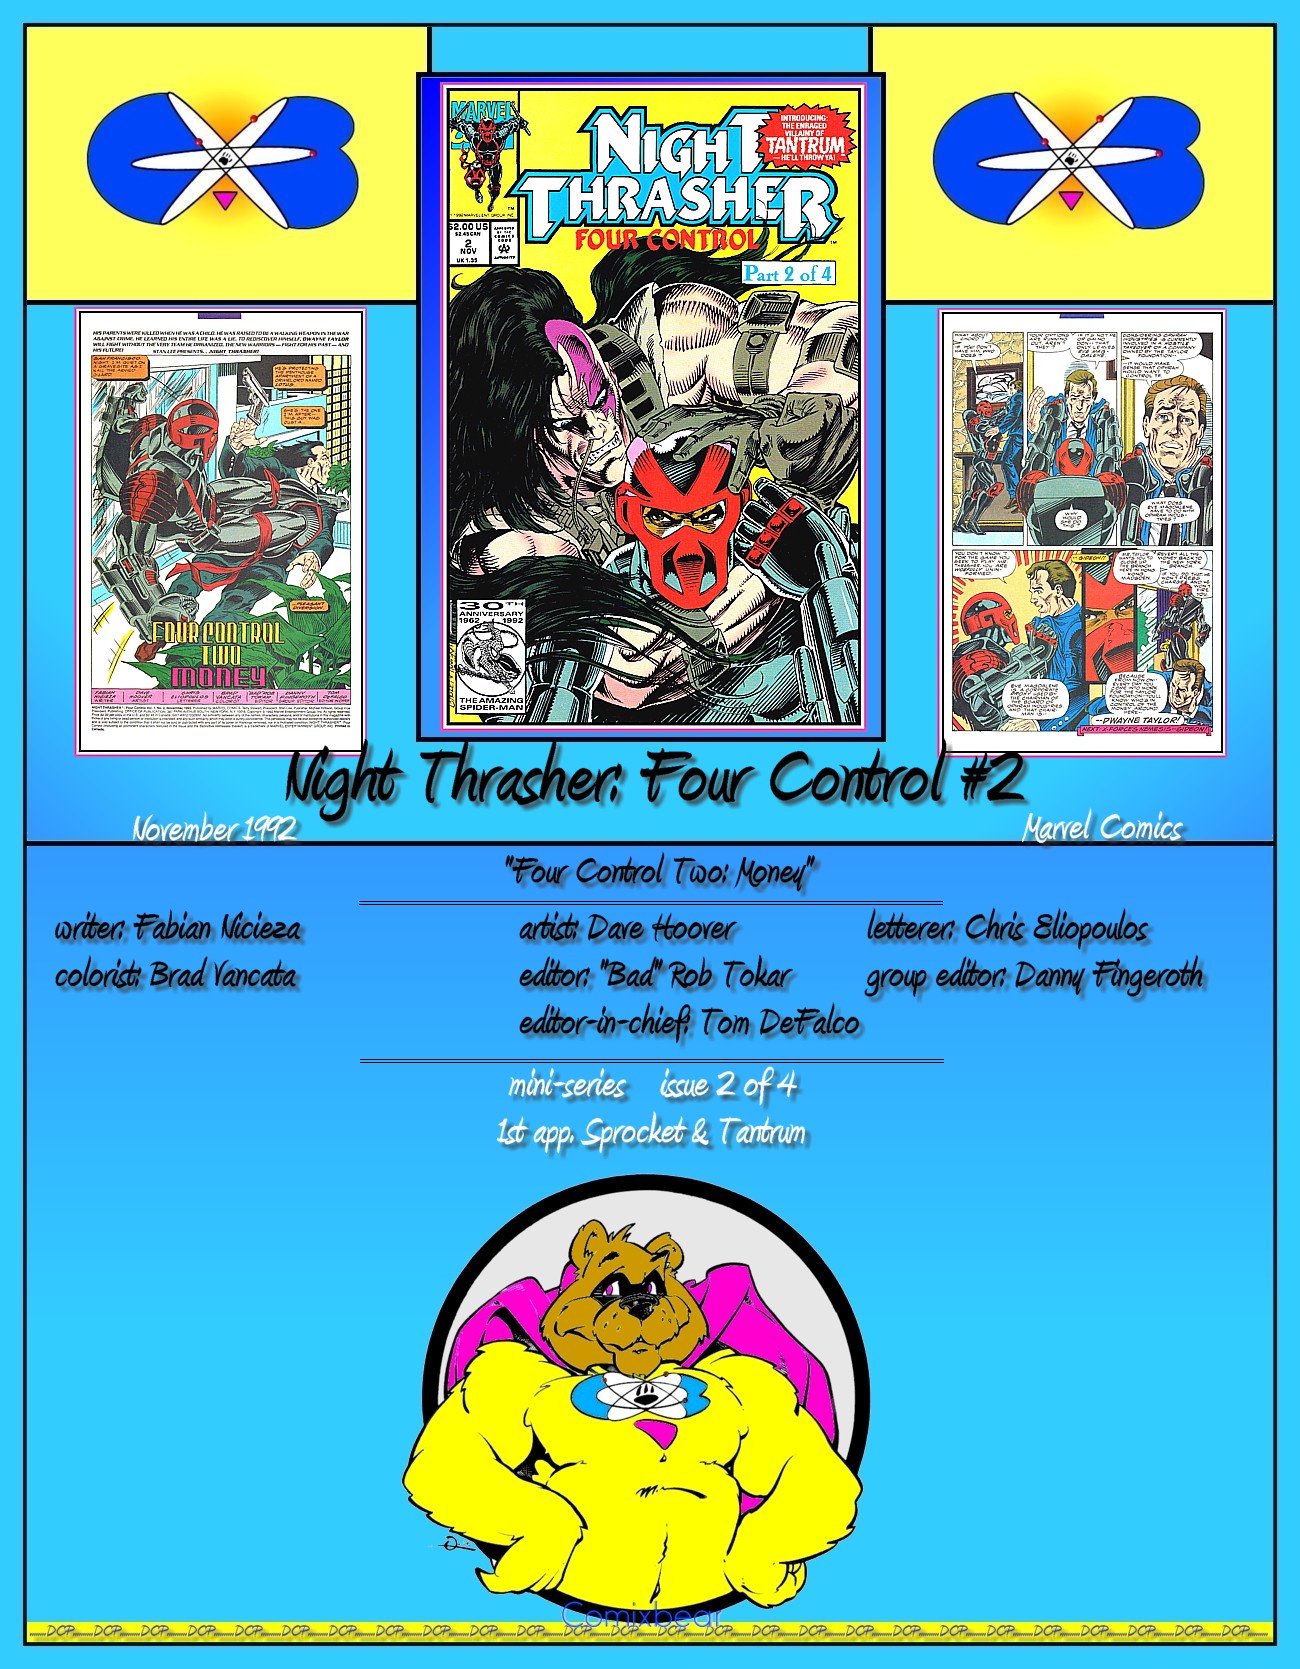 Read online Night Thrasher: Four Control comic -  Issue #2 - 36